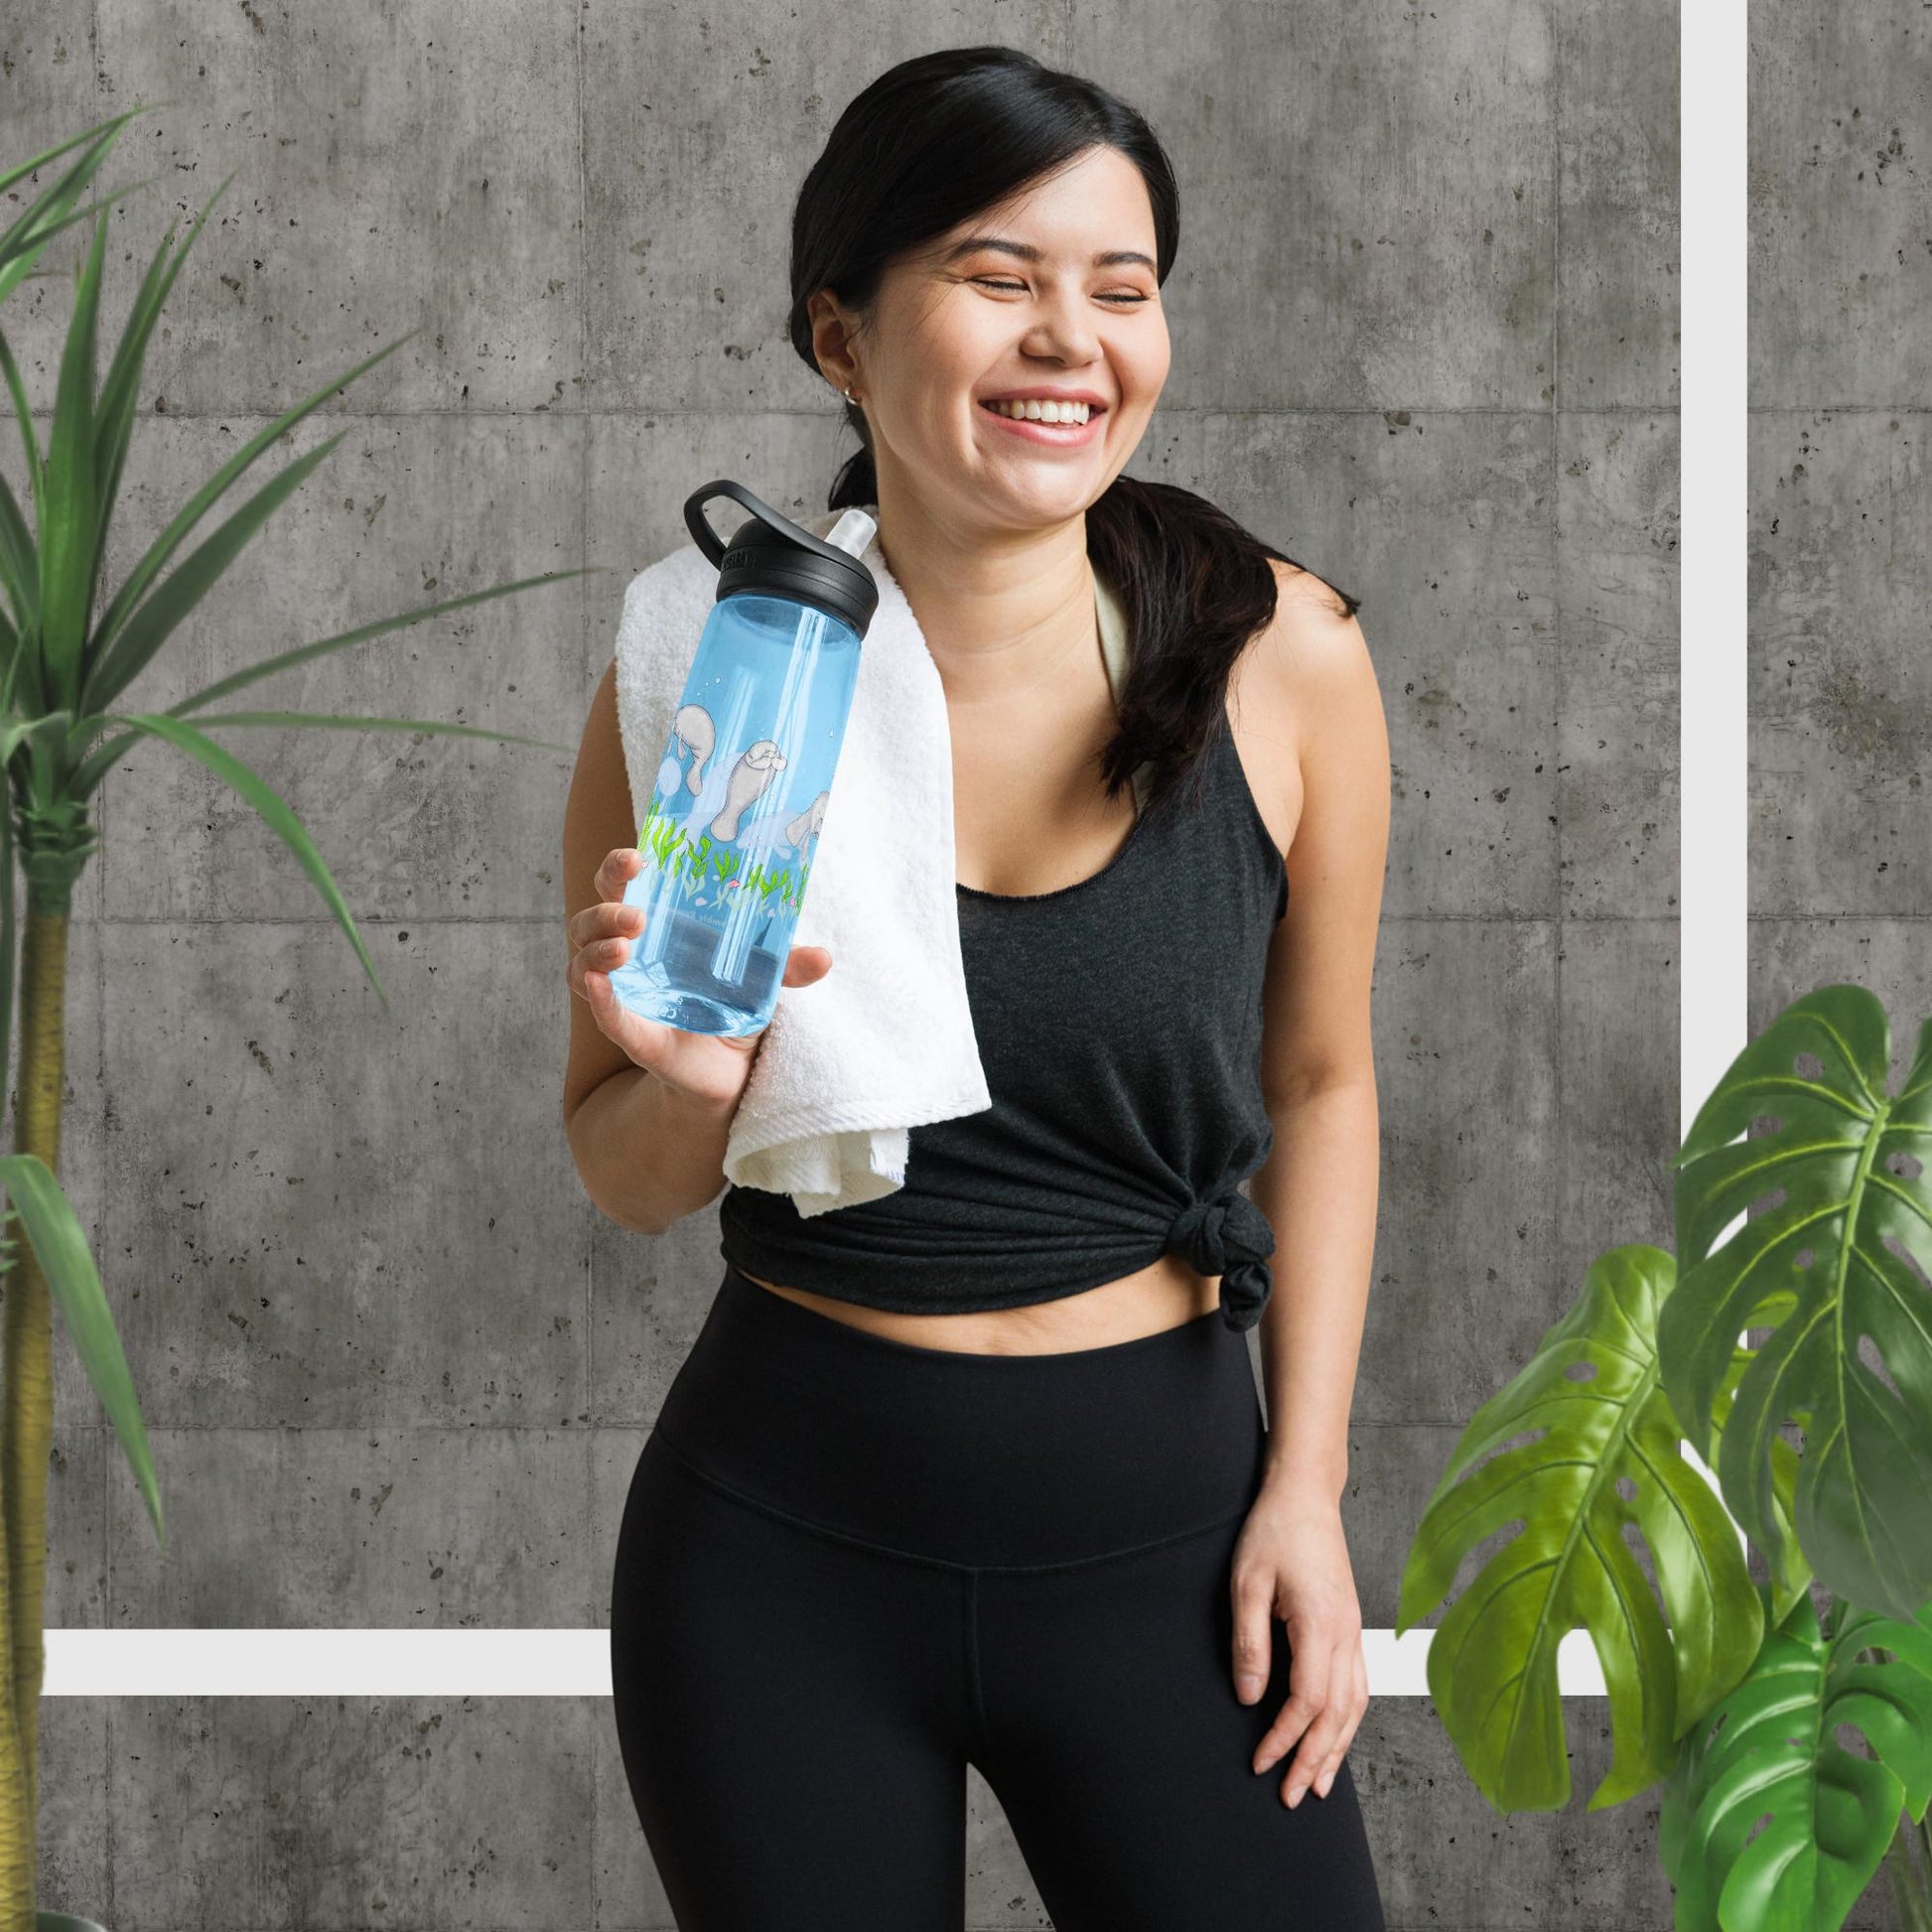 25 ounce sports water bottle with spill proof lid and bite valve. Light blue stain and odor-resistant BPA-free plastic with manatee designs around the bottle, swimming above the seaweed and shells. Shown in gym model's hand by potted plants.